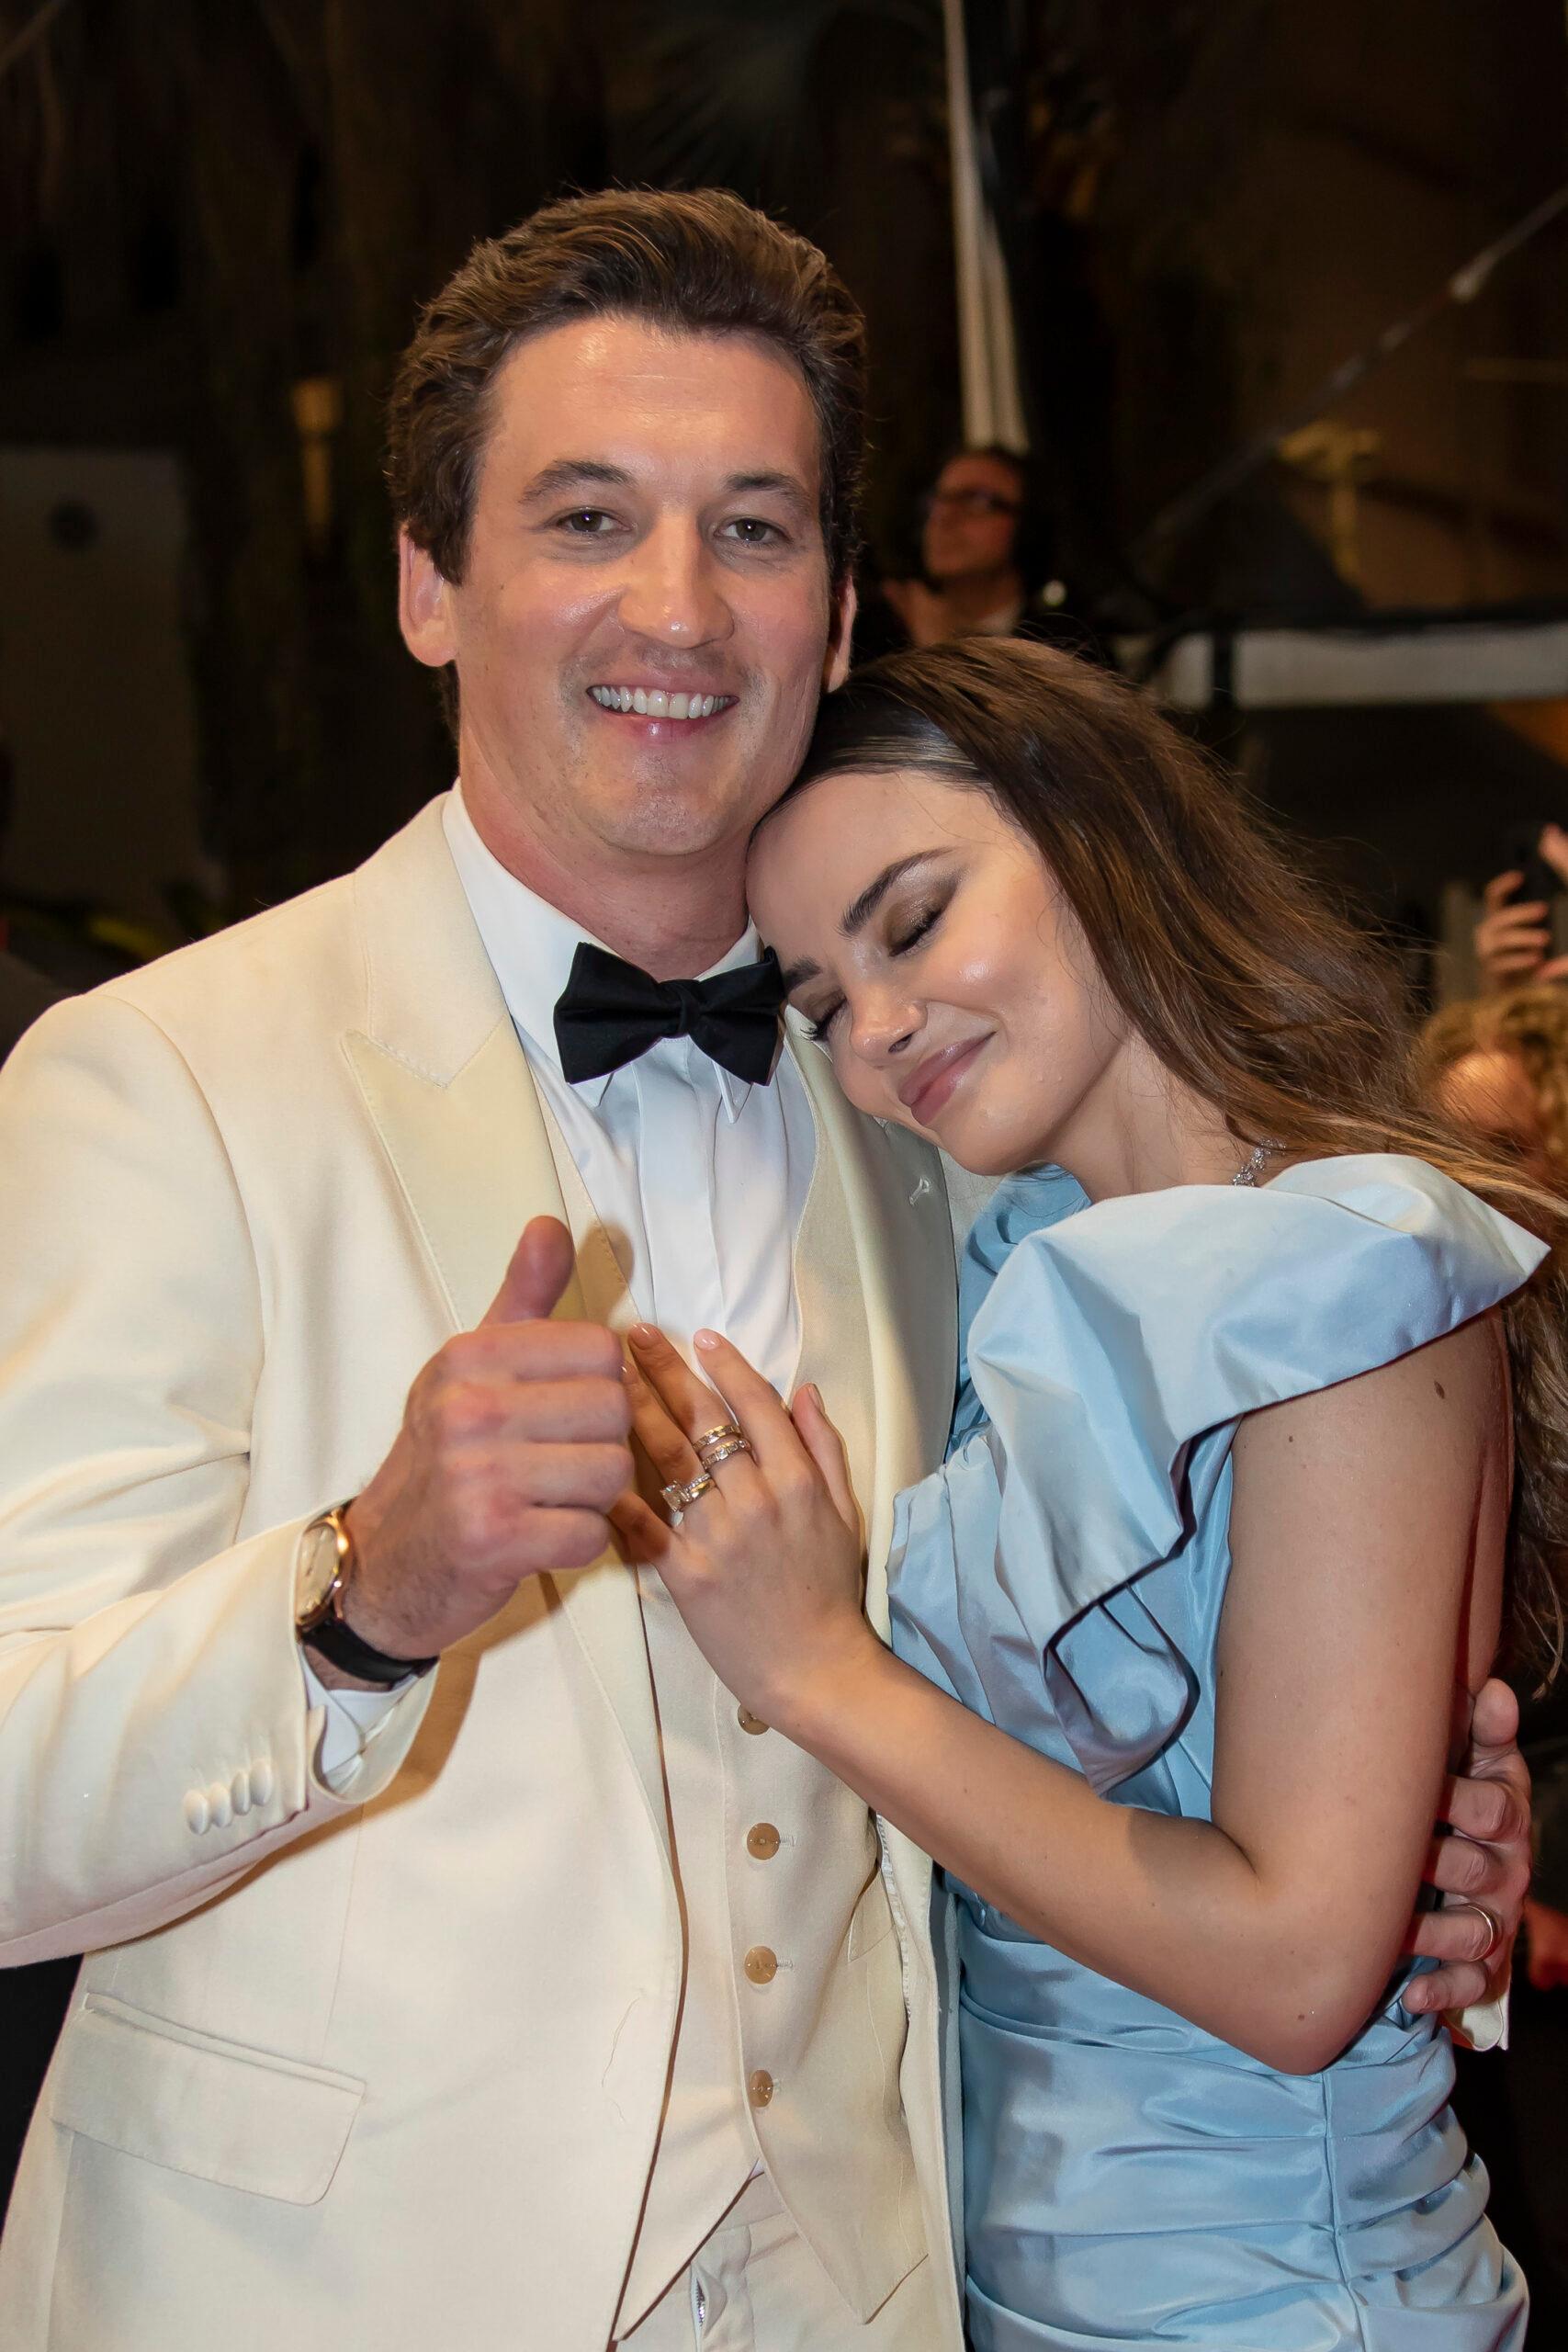 75th annual Cannes film festival at Palais des Festivals on May 18, 2022 in Cannes. 18 May 2022 Pictured: Miles Teller, Keleigh Sperry. Photo credit: KCS Presse / MEGA TheMegaAgency.com +1 888 505 6342 (Mega Agency TagID: MEGA859198_022.jpg) [Photo via Mega Agency]